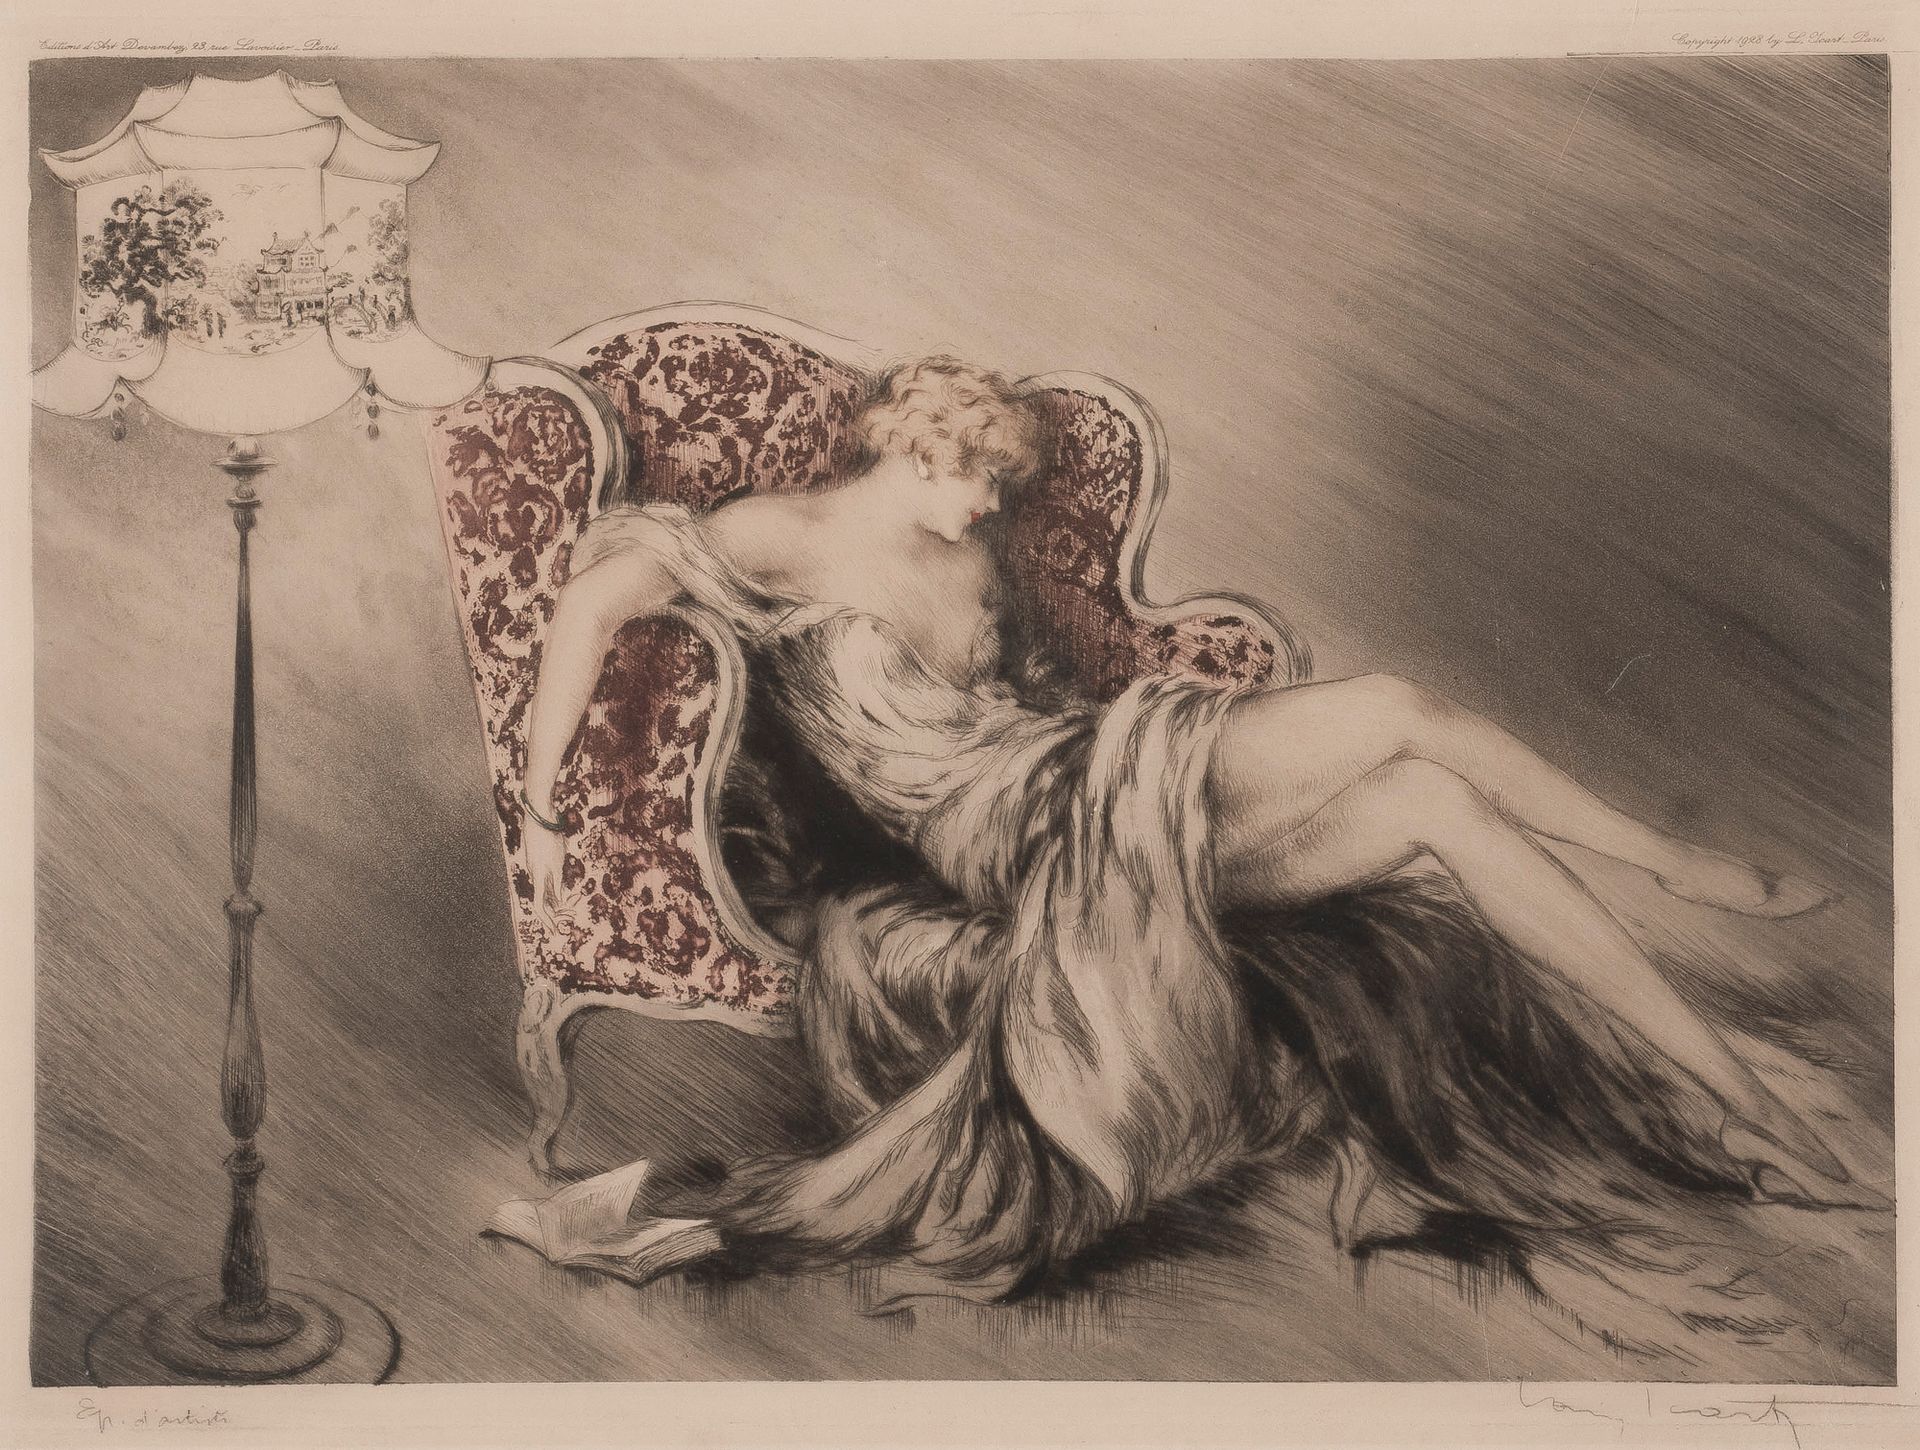 Louis ICART (1888-1950) 
In the Nest/Demoiselle au chapeau, c. 1922
Etching and &hellip;